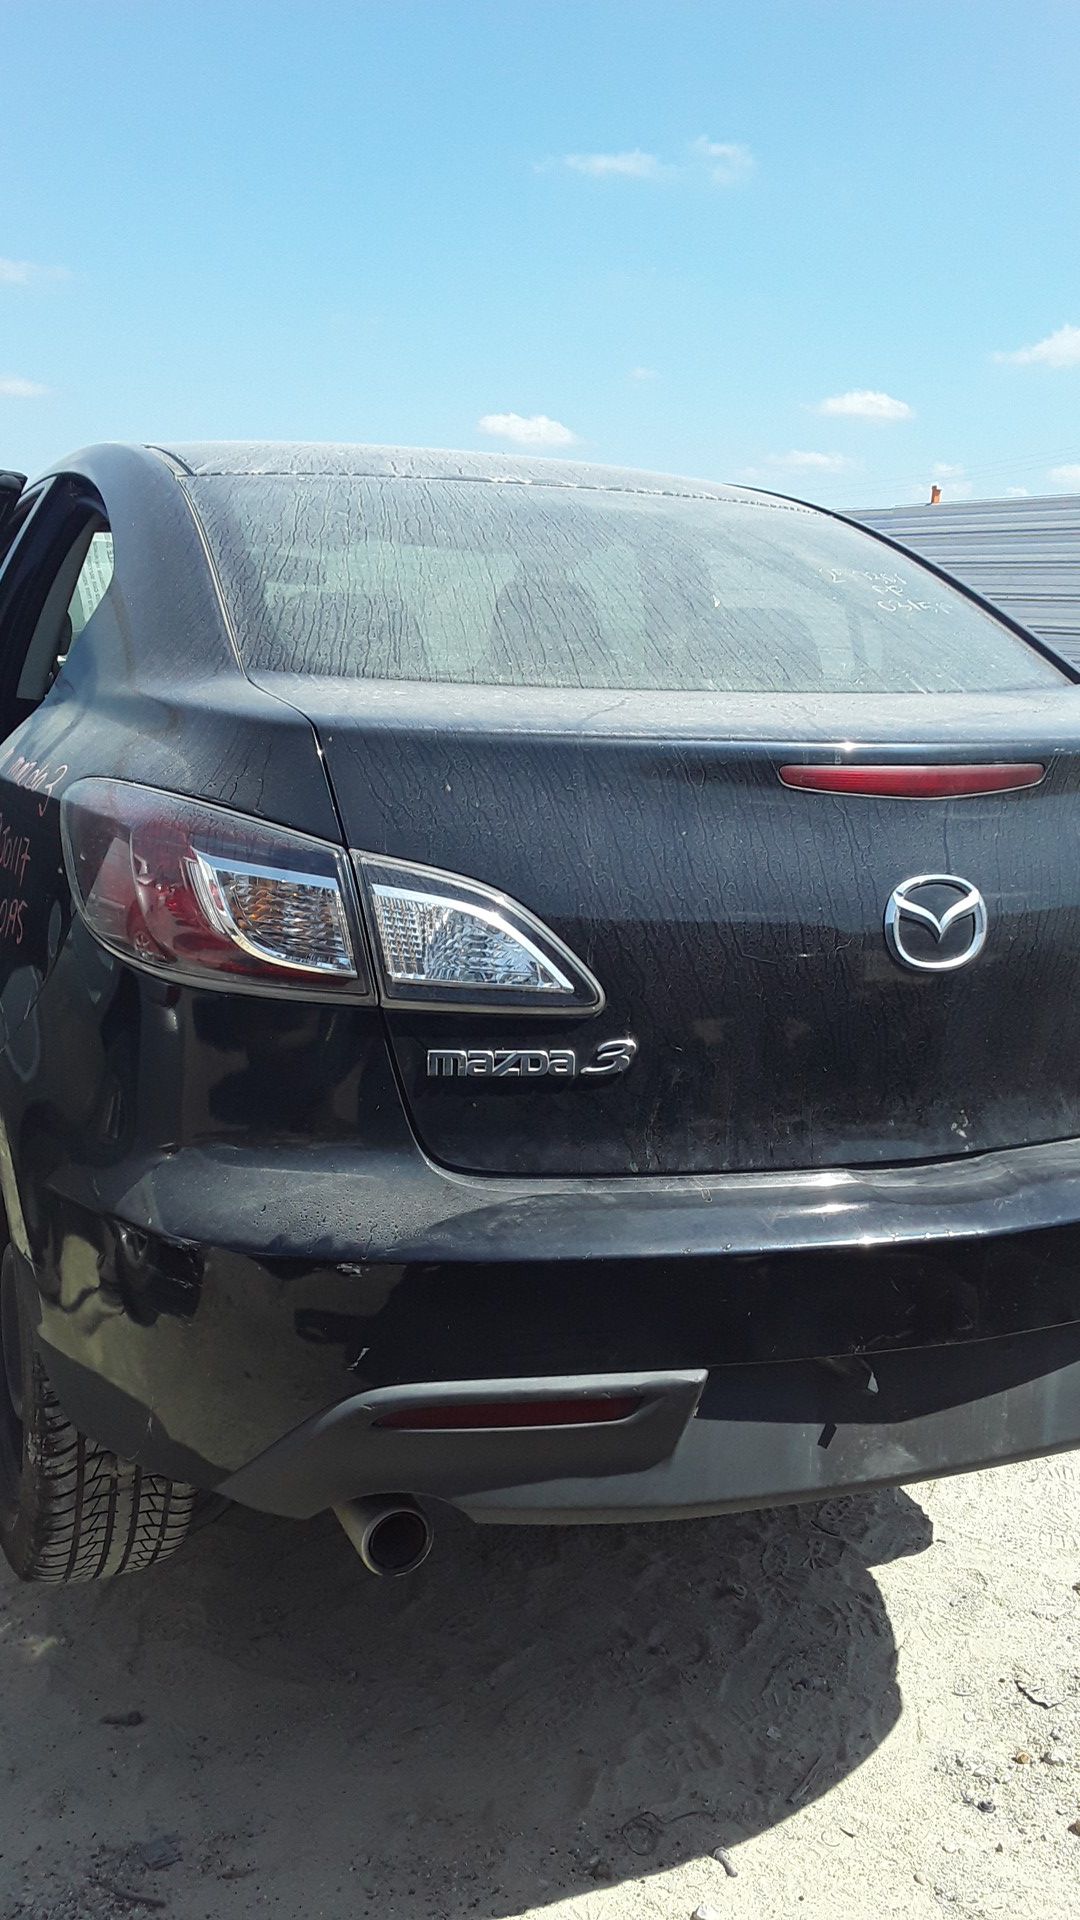 2010 Mazda 3 for parts